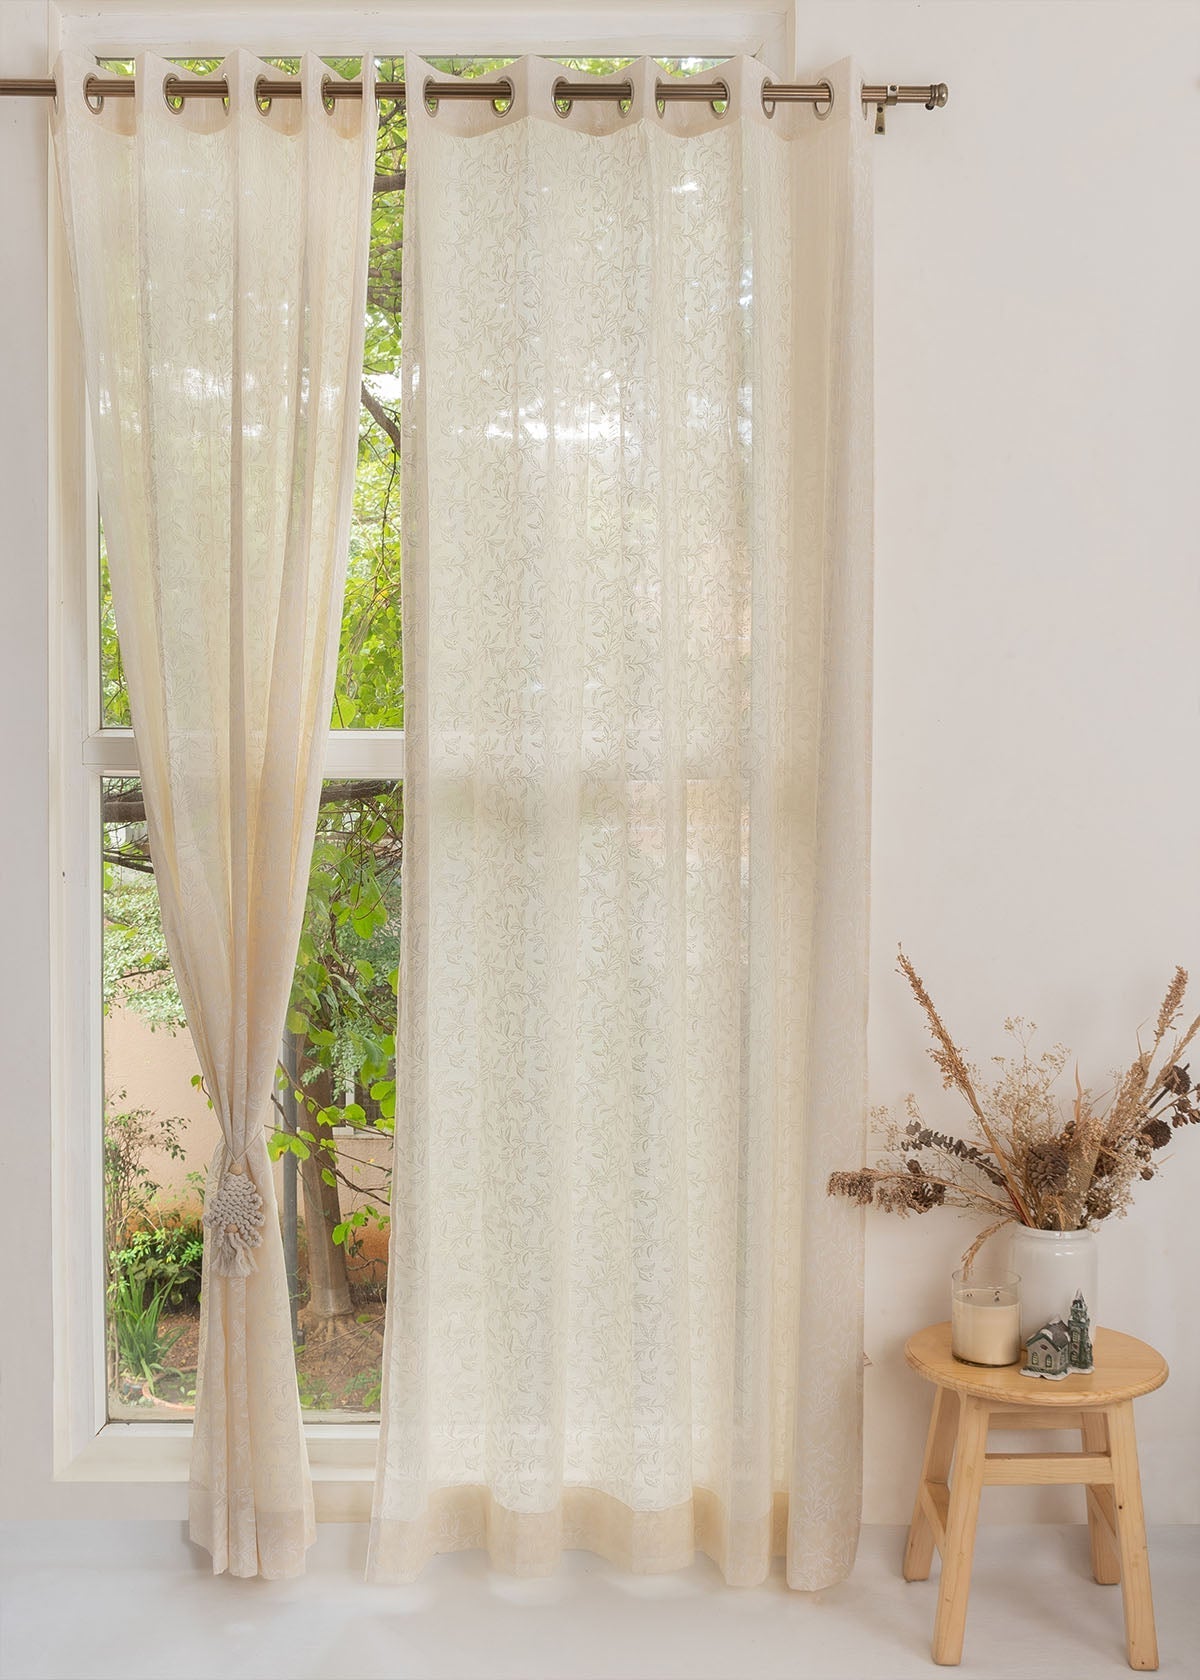 Trailing Berries 100% Cotton Sheer minimal curtain for Living room - Light filtering - Cream - Pack of 1